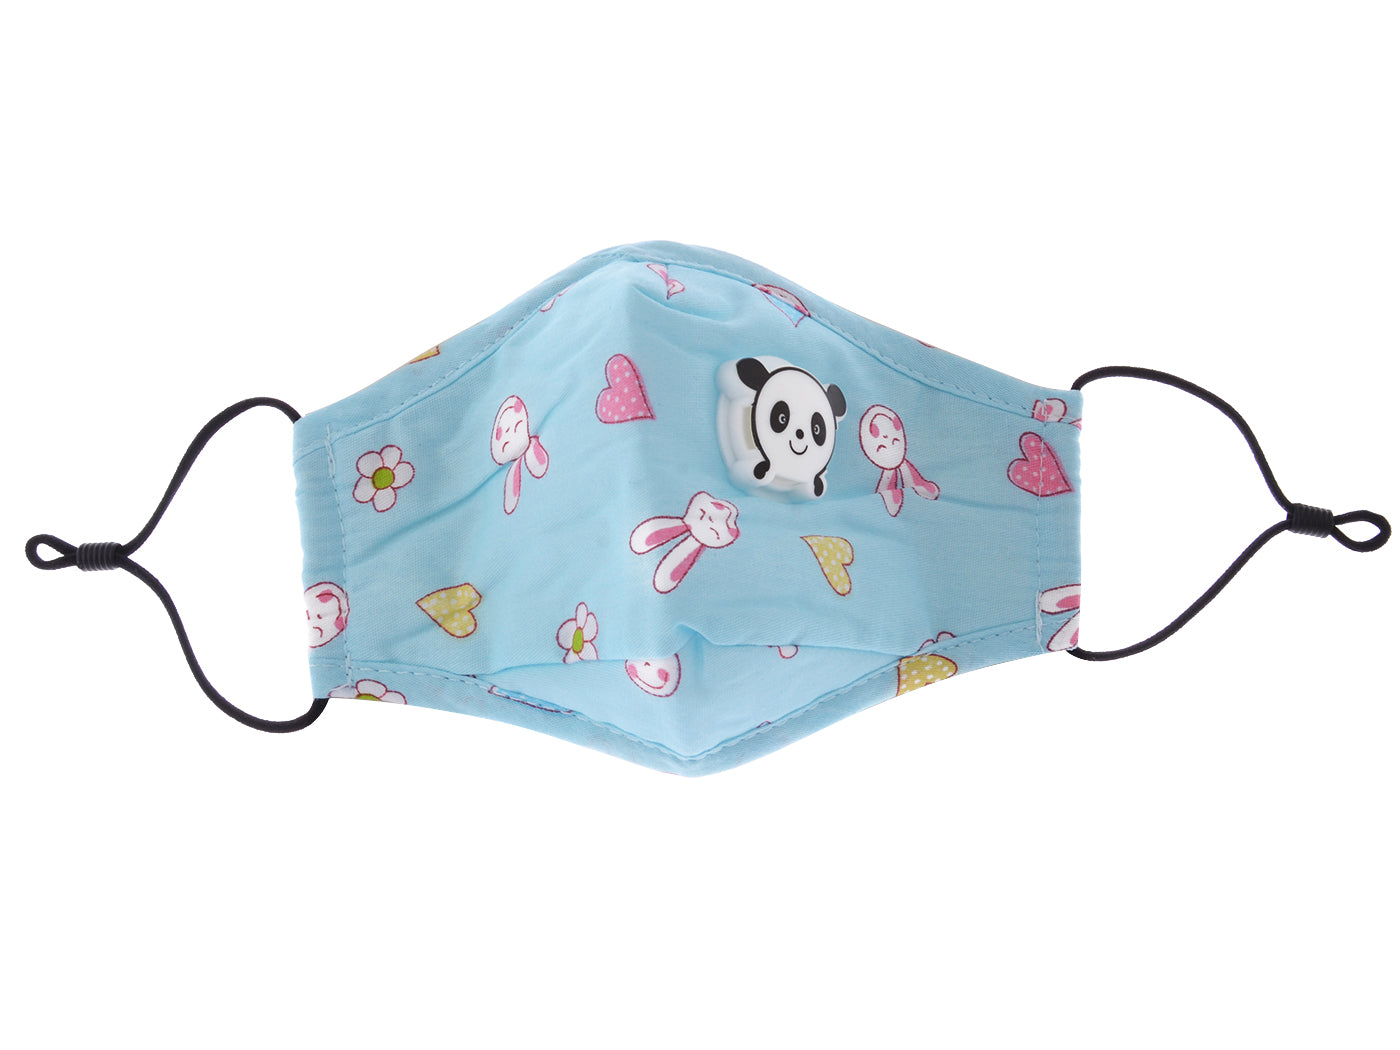 Children's Printed Panda Face Cover with Breathing Valve - 6Pack